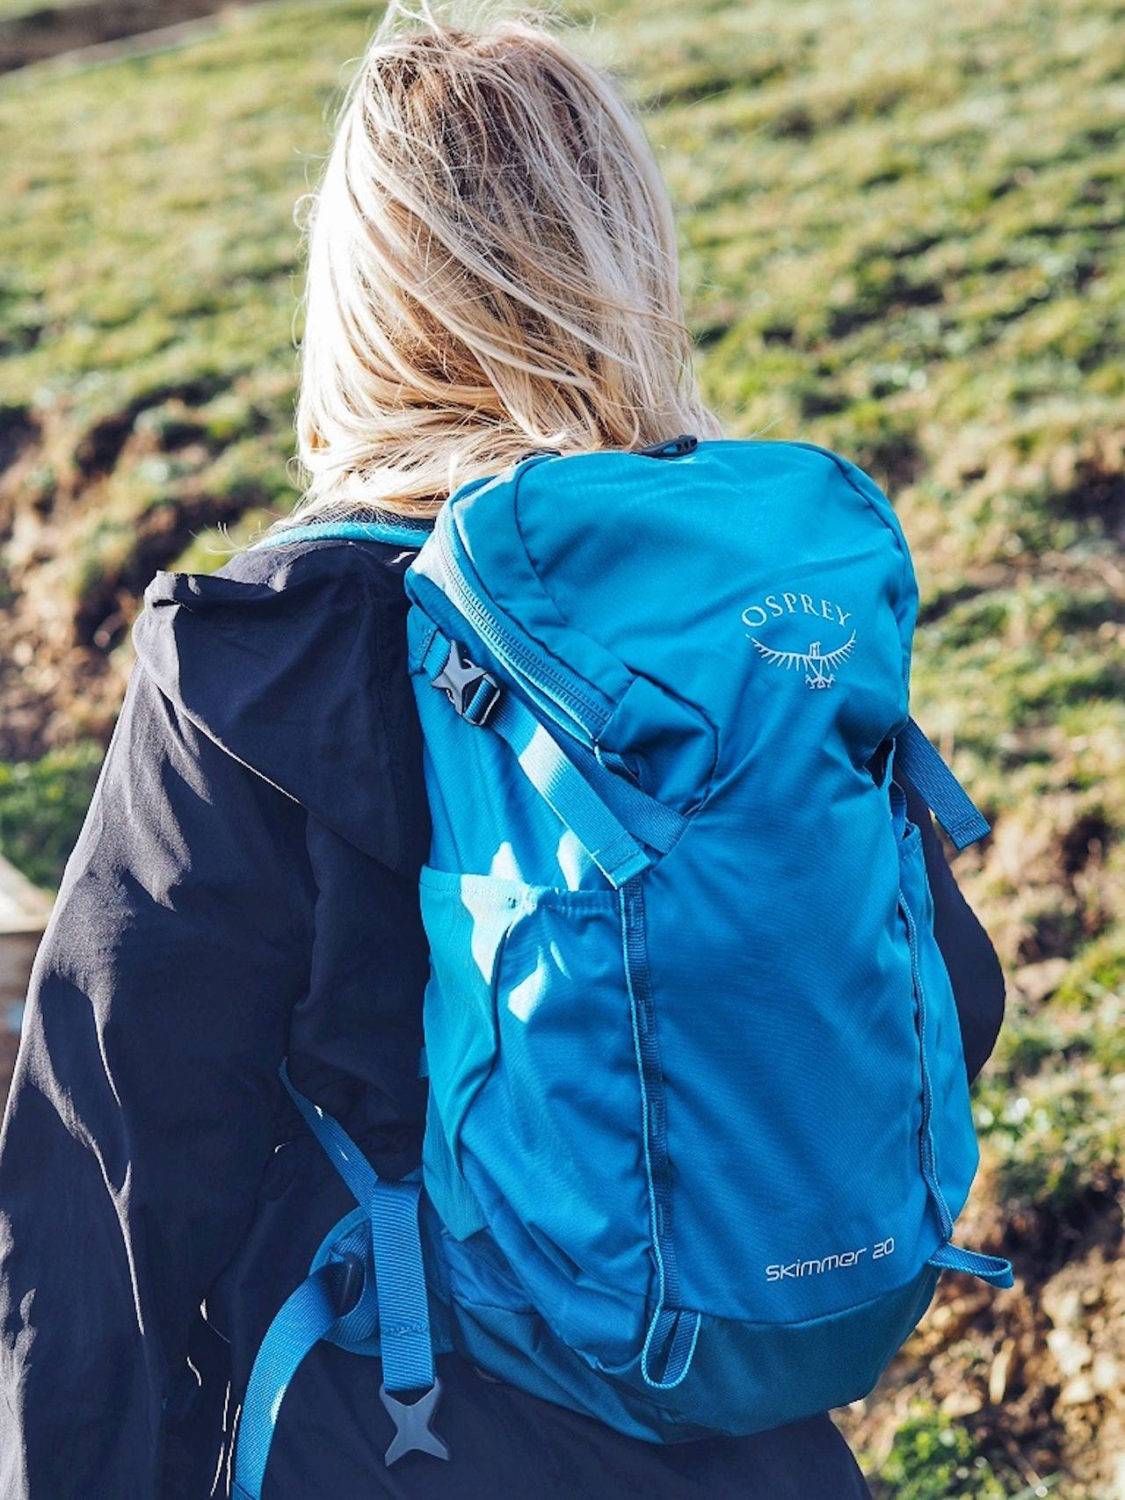 What To Look For In A Female Backpack: Osprey Skimmer 20 Review - While I&#39;m Young